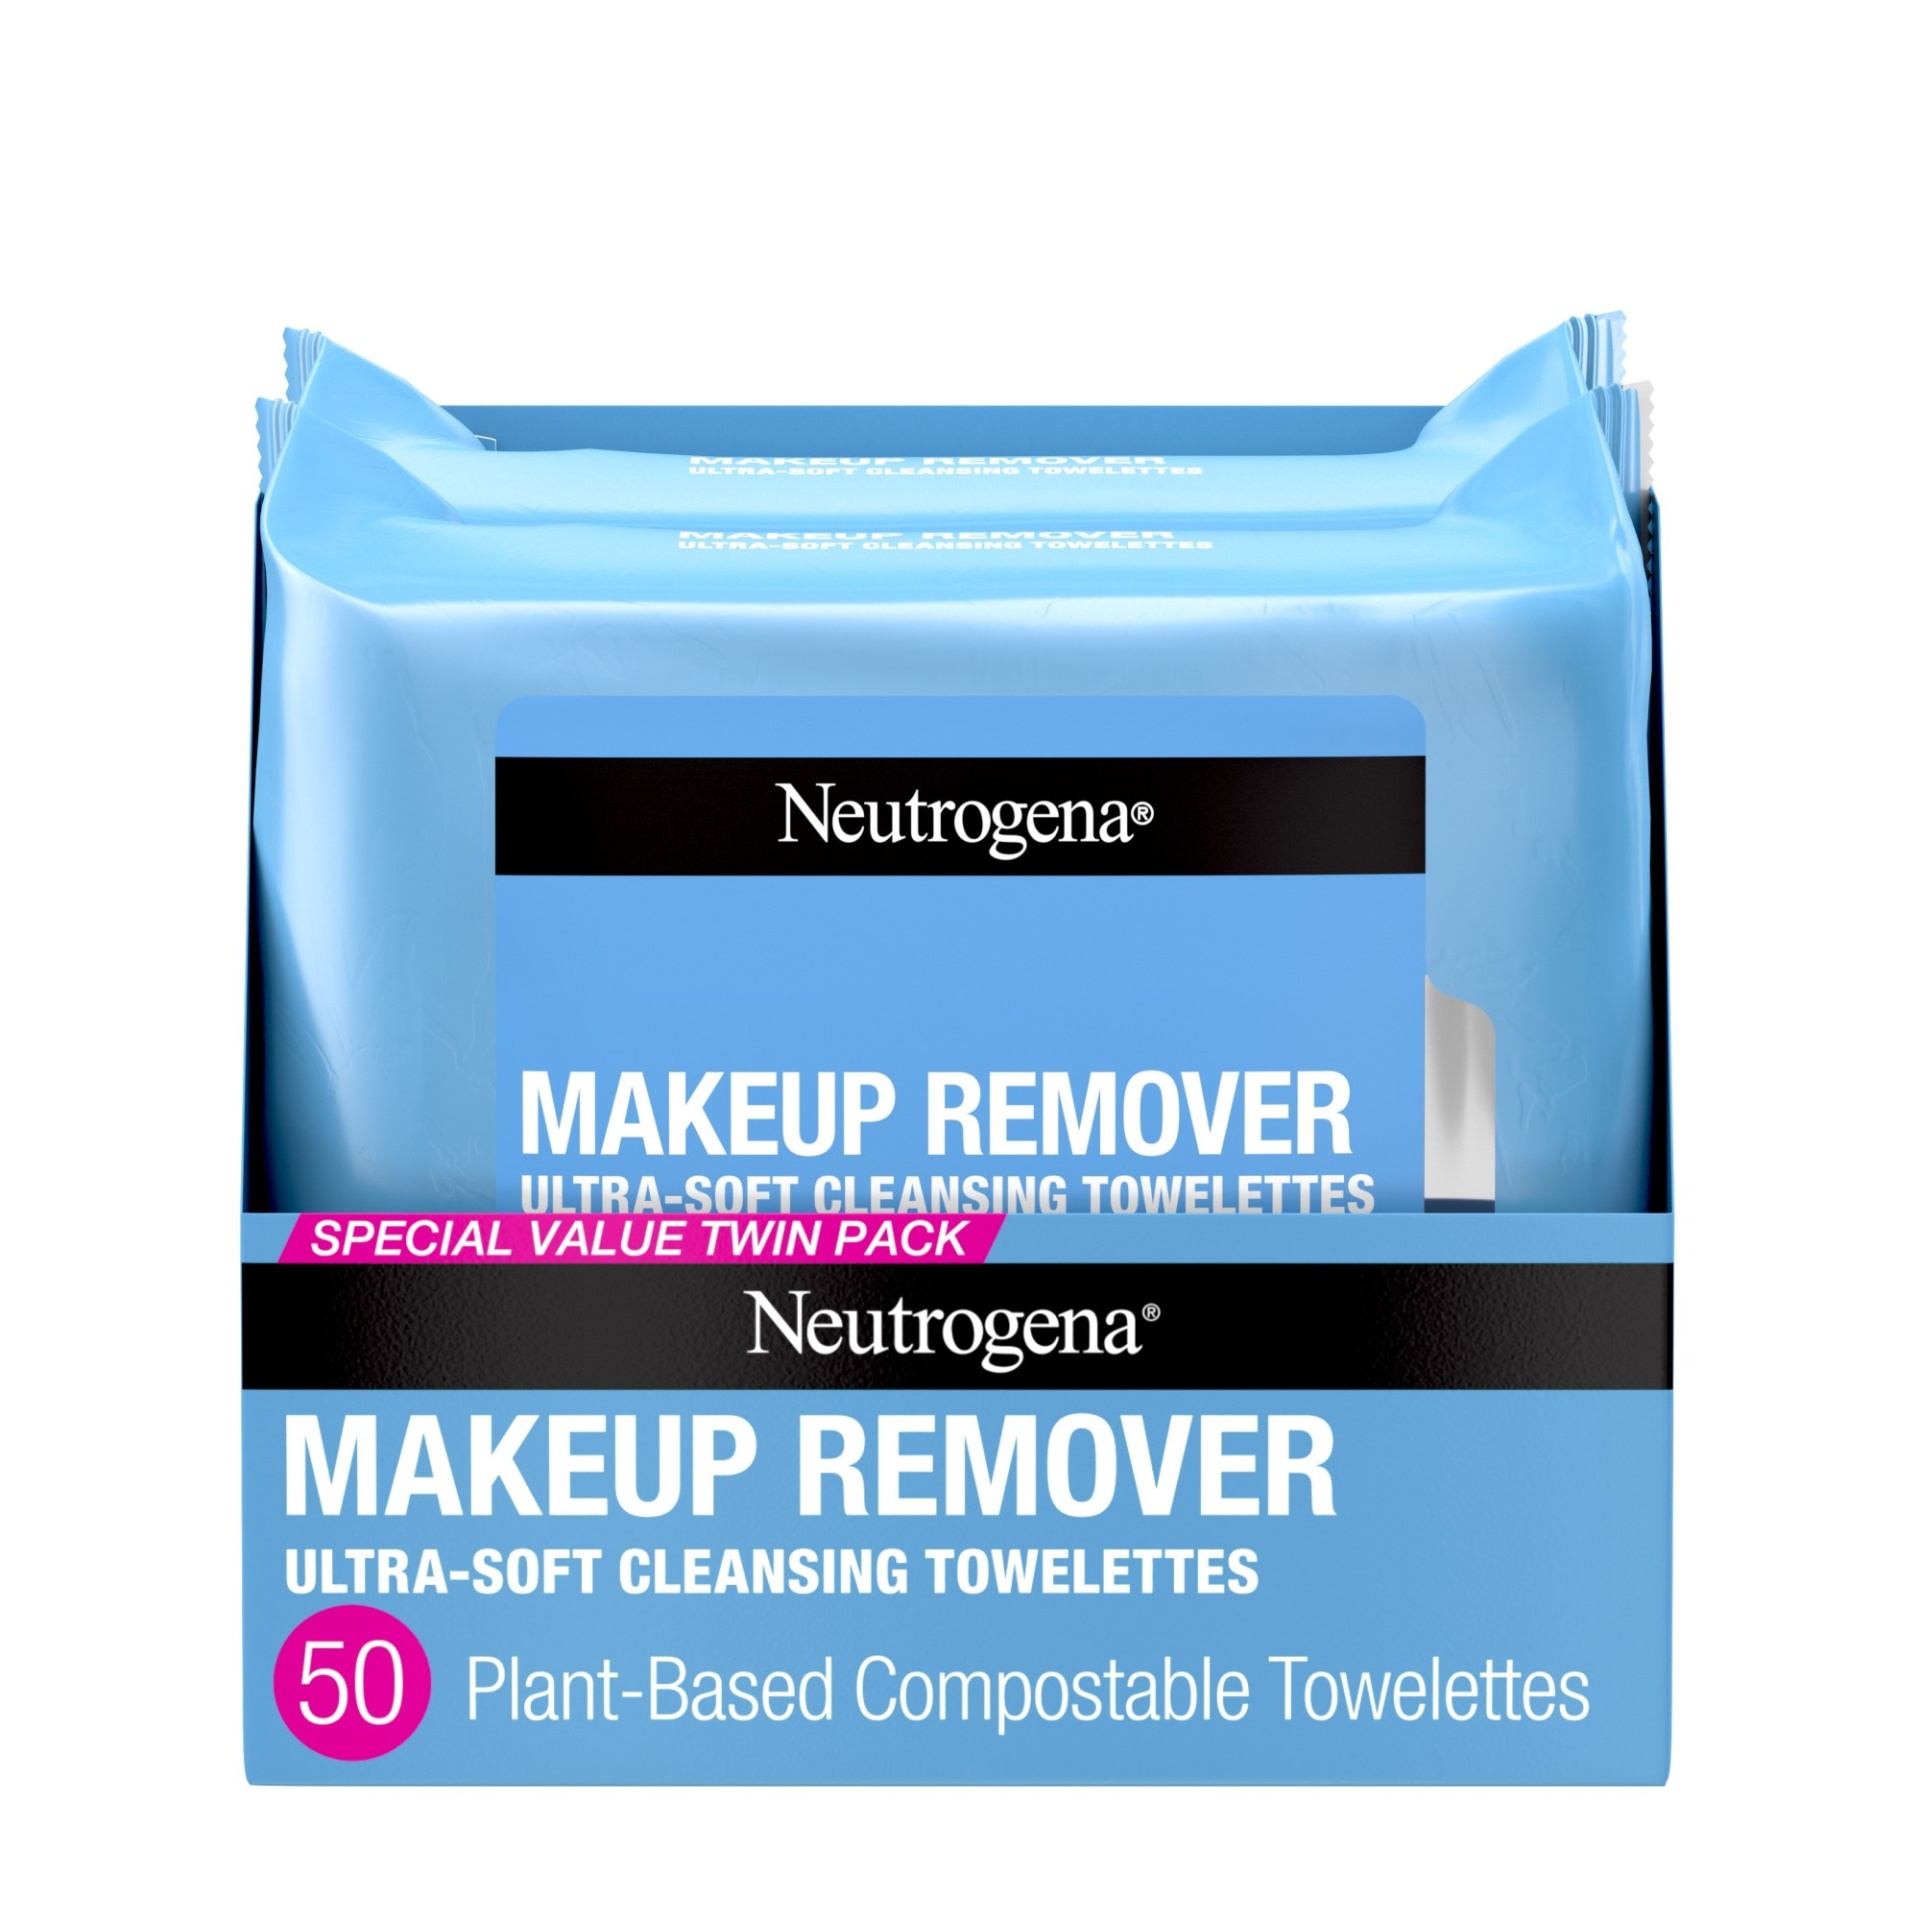 slide 1 of 7, Neutrogena Makeup Remover Cleansing Face Wipes, Daily Cleansing Facial Towelettes Remove Makeup & Waterproof Mascara, Alcohol-Free, 100% Plant-Based Fibers, Value Twin Pack, 25 ct; 2 ct